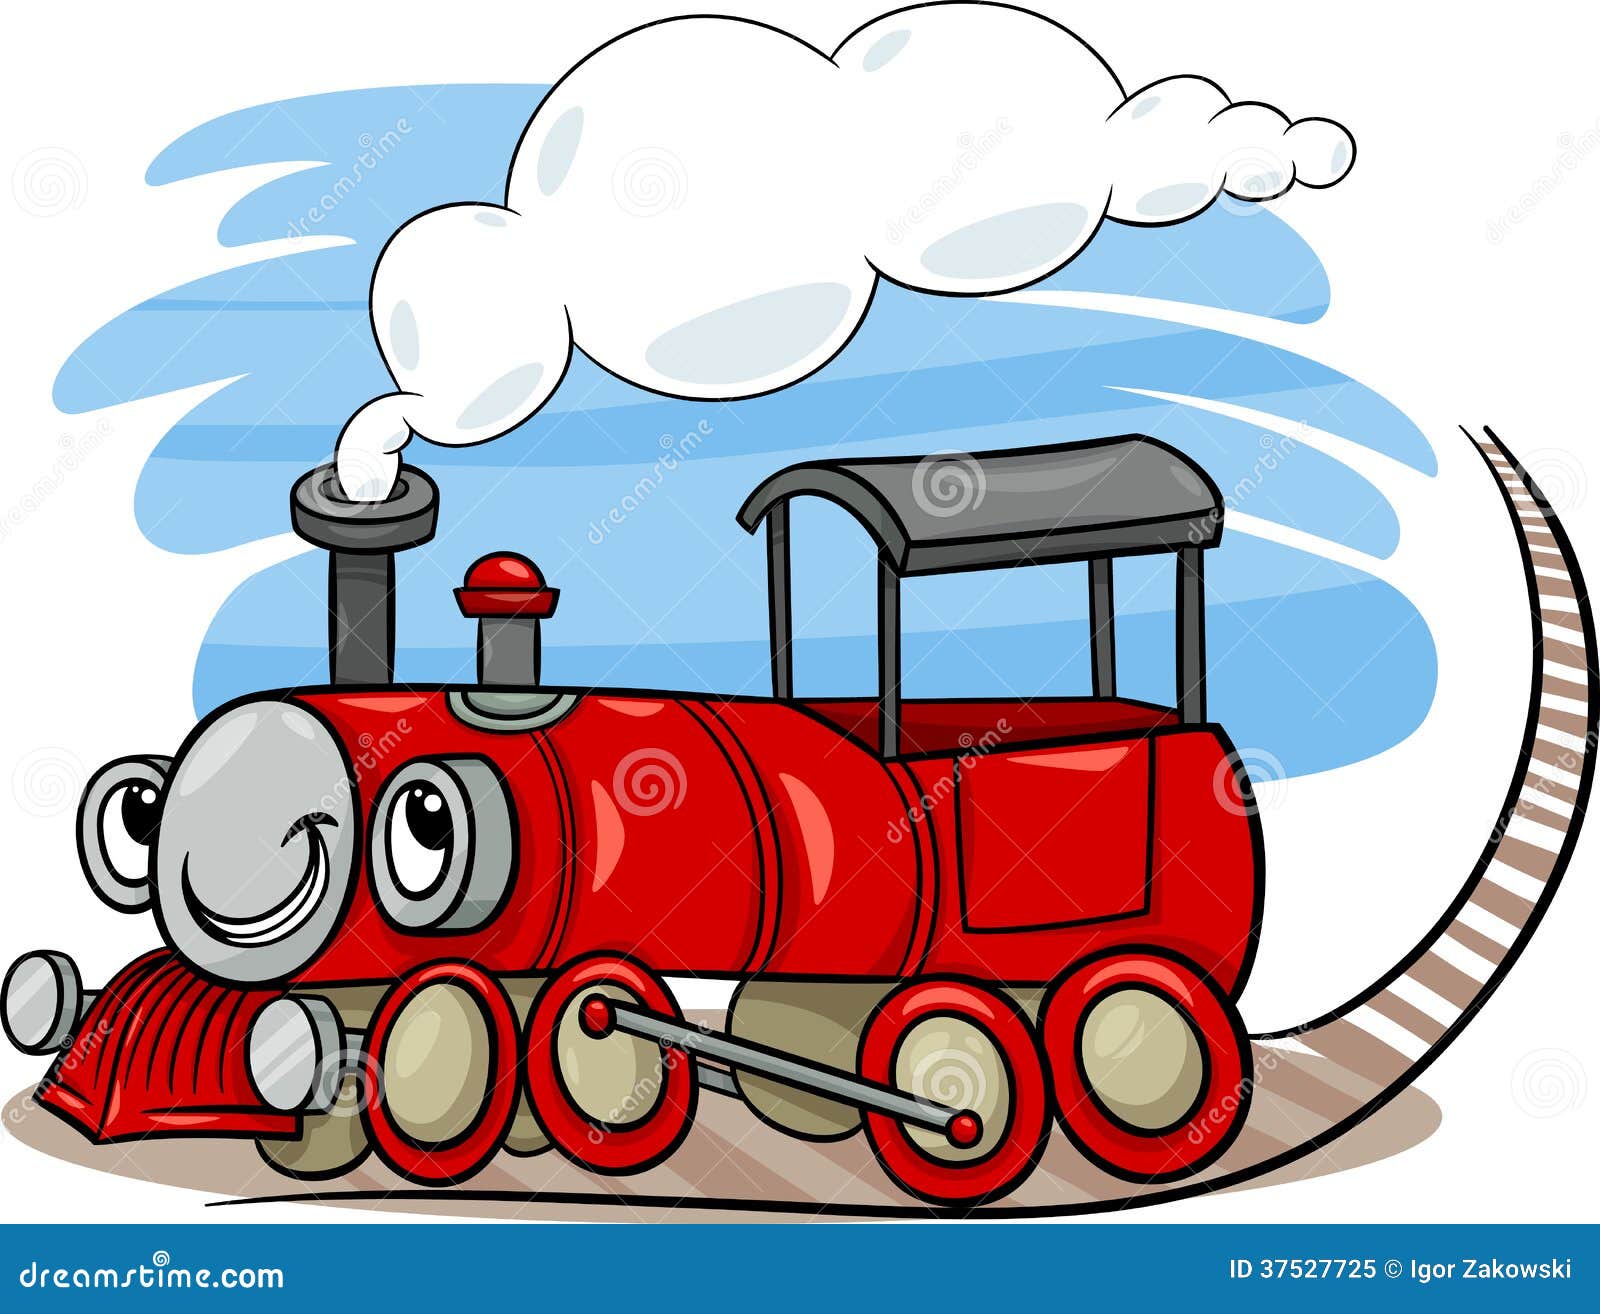 Cartoon Locomotive or Engine Character Stock Vector - Illustration of  carriage, children: 37527725